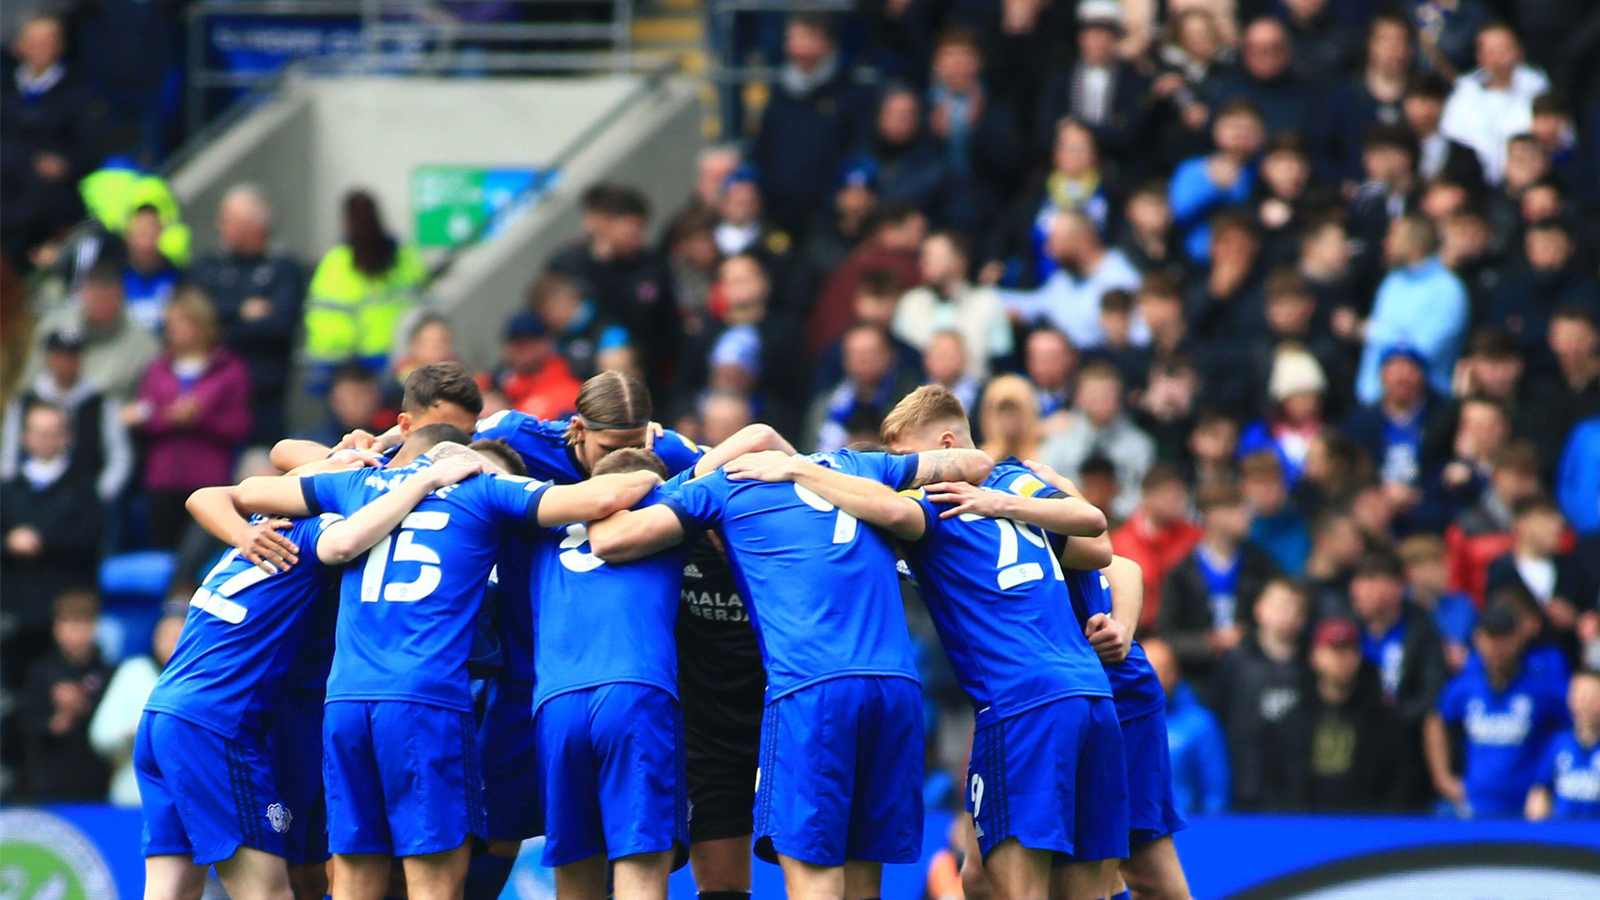 Cardiff City players